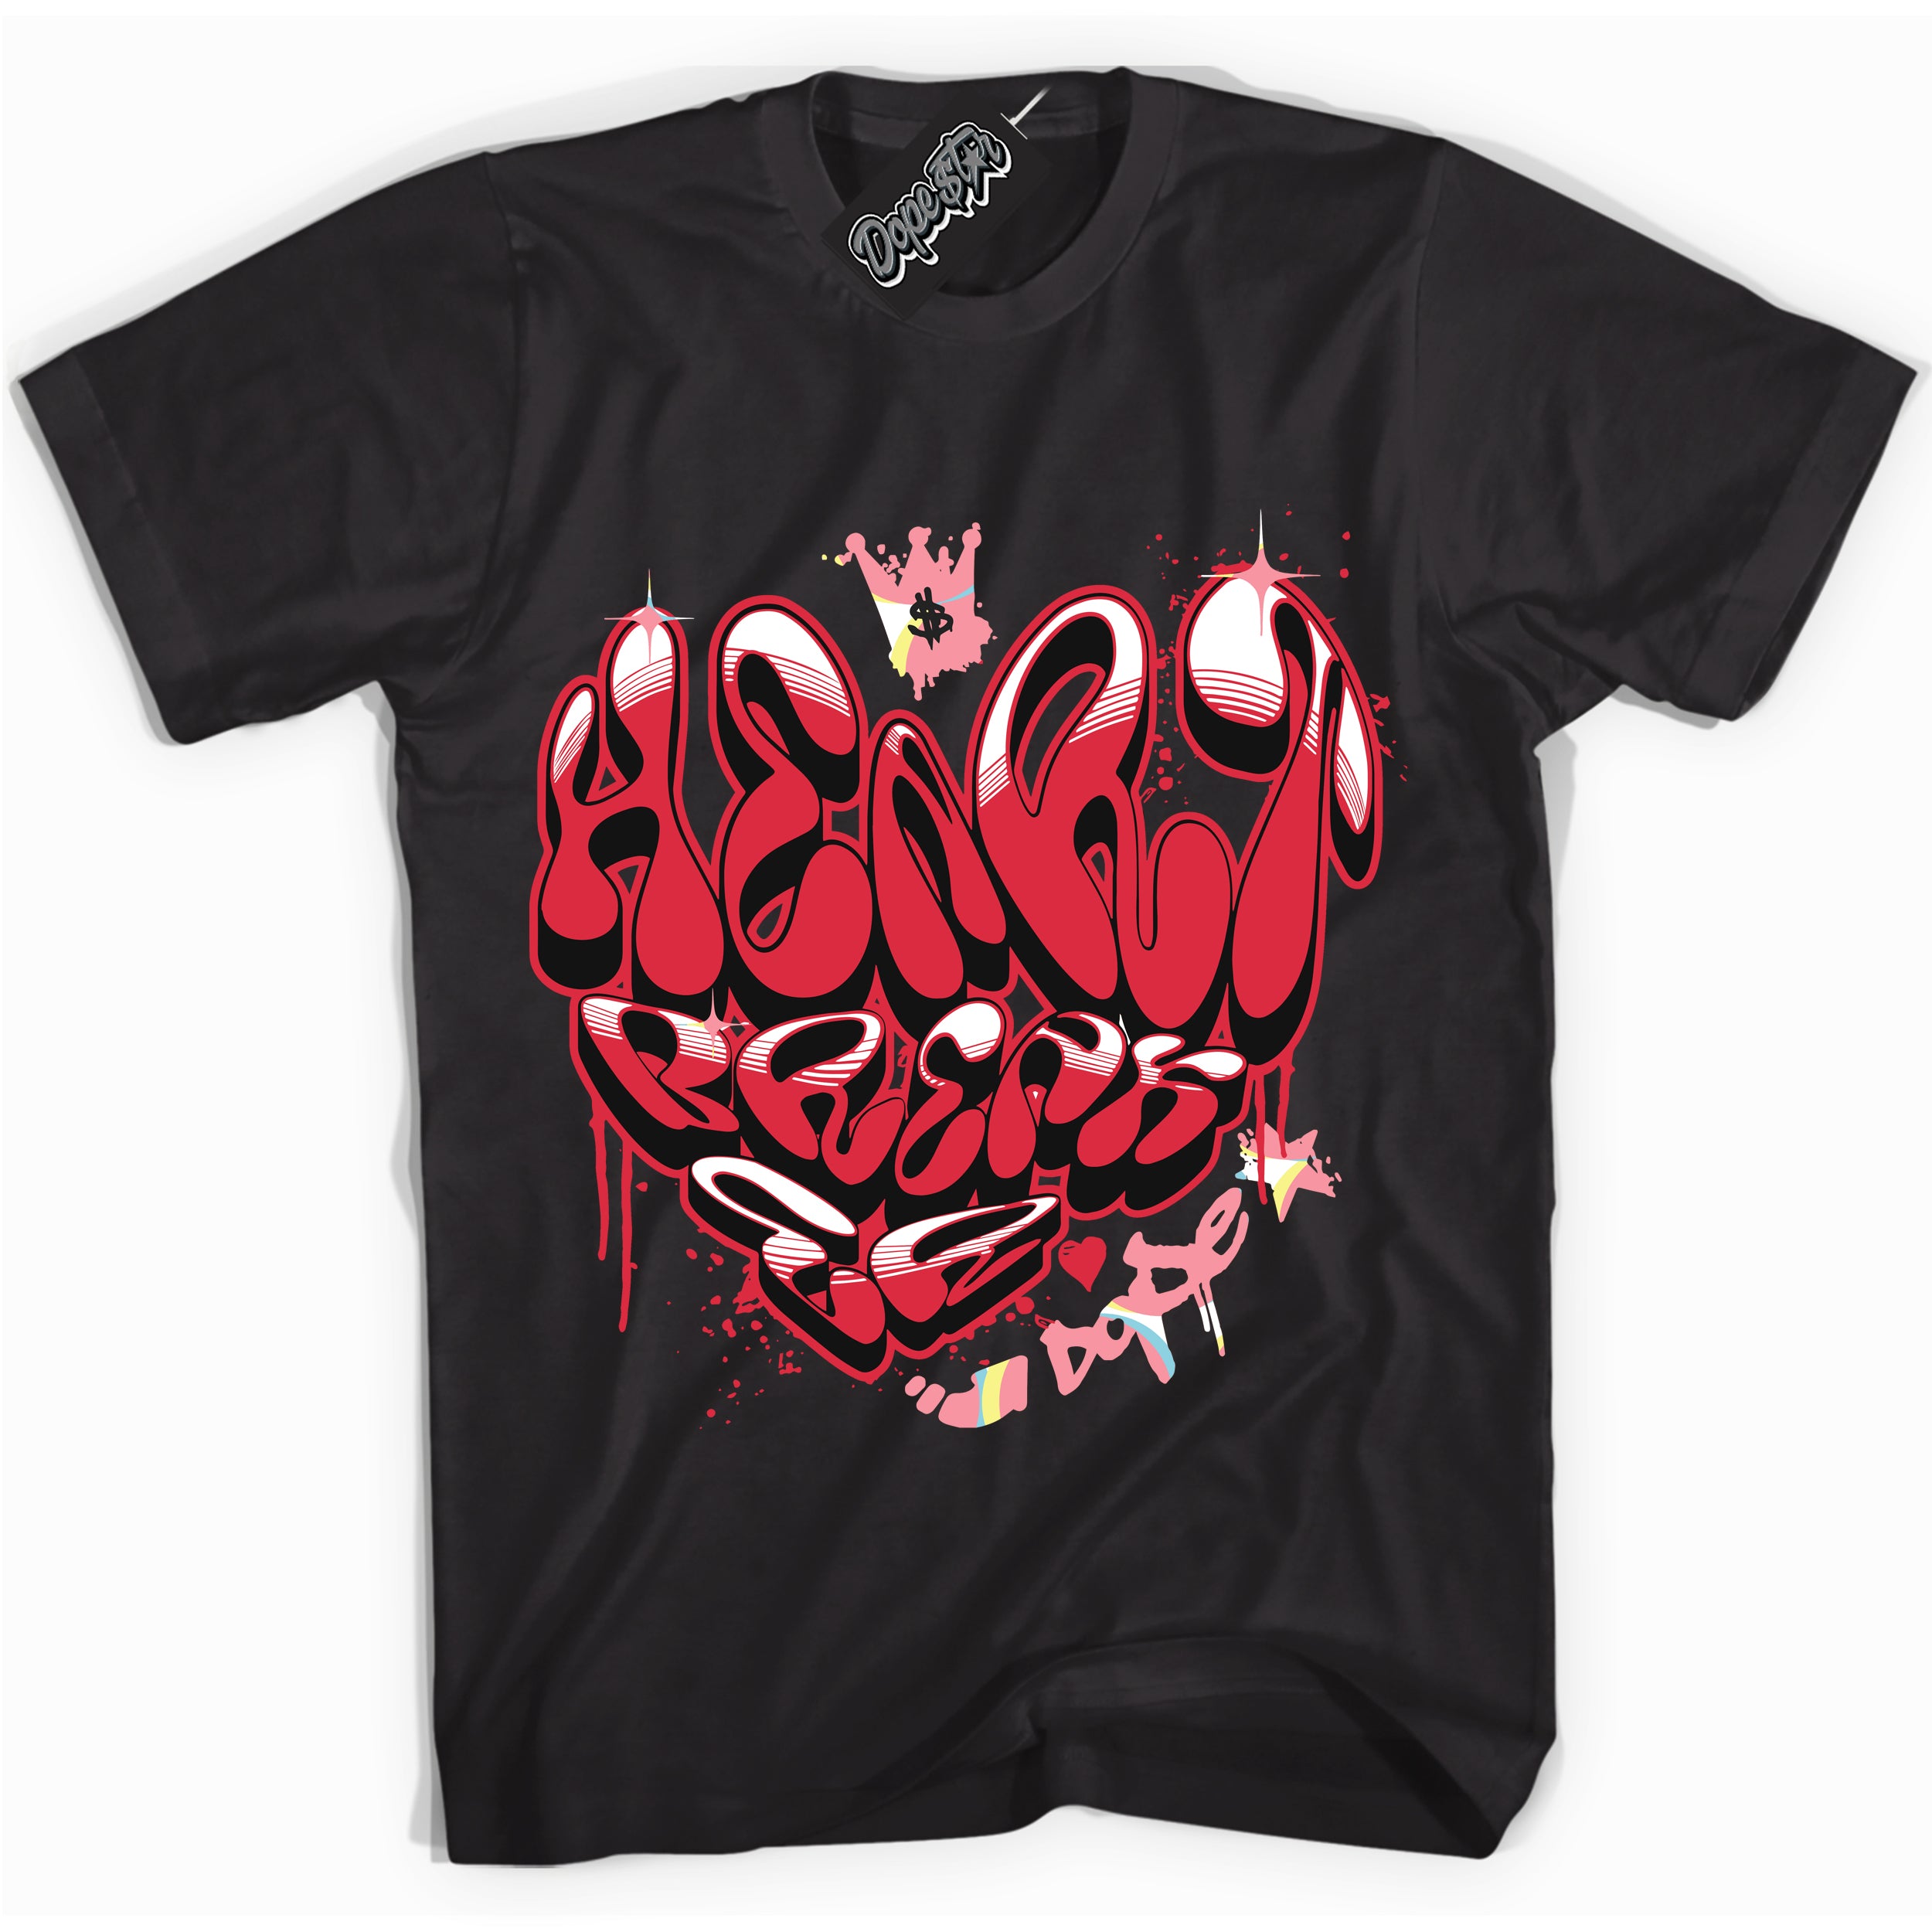 Cool Black graphic tee with “ Heartbreaker Graffiti ” design, that perfectly matches Spider-Verse 1s sneakers 